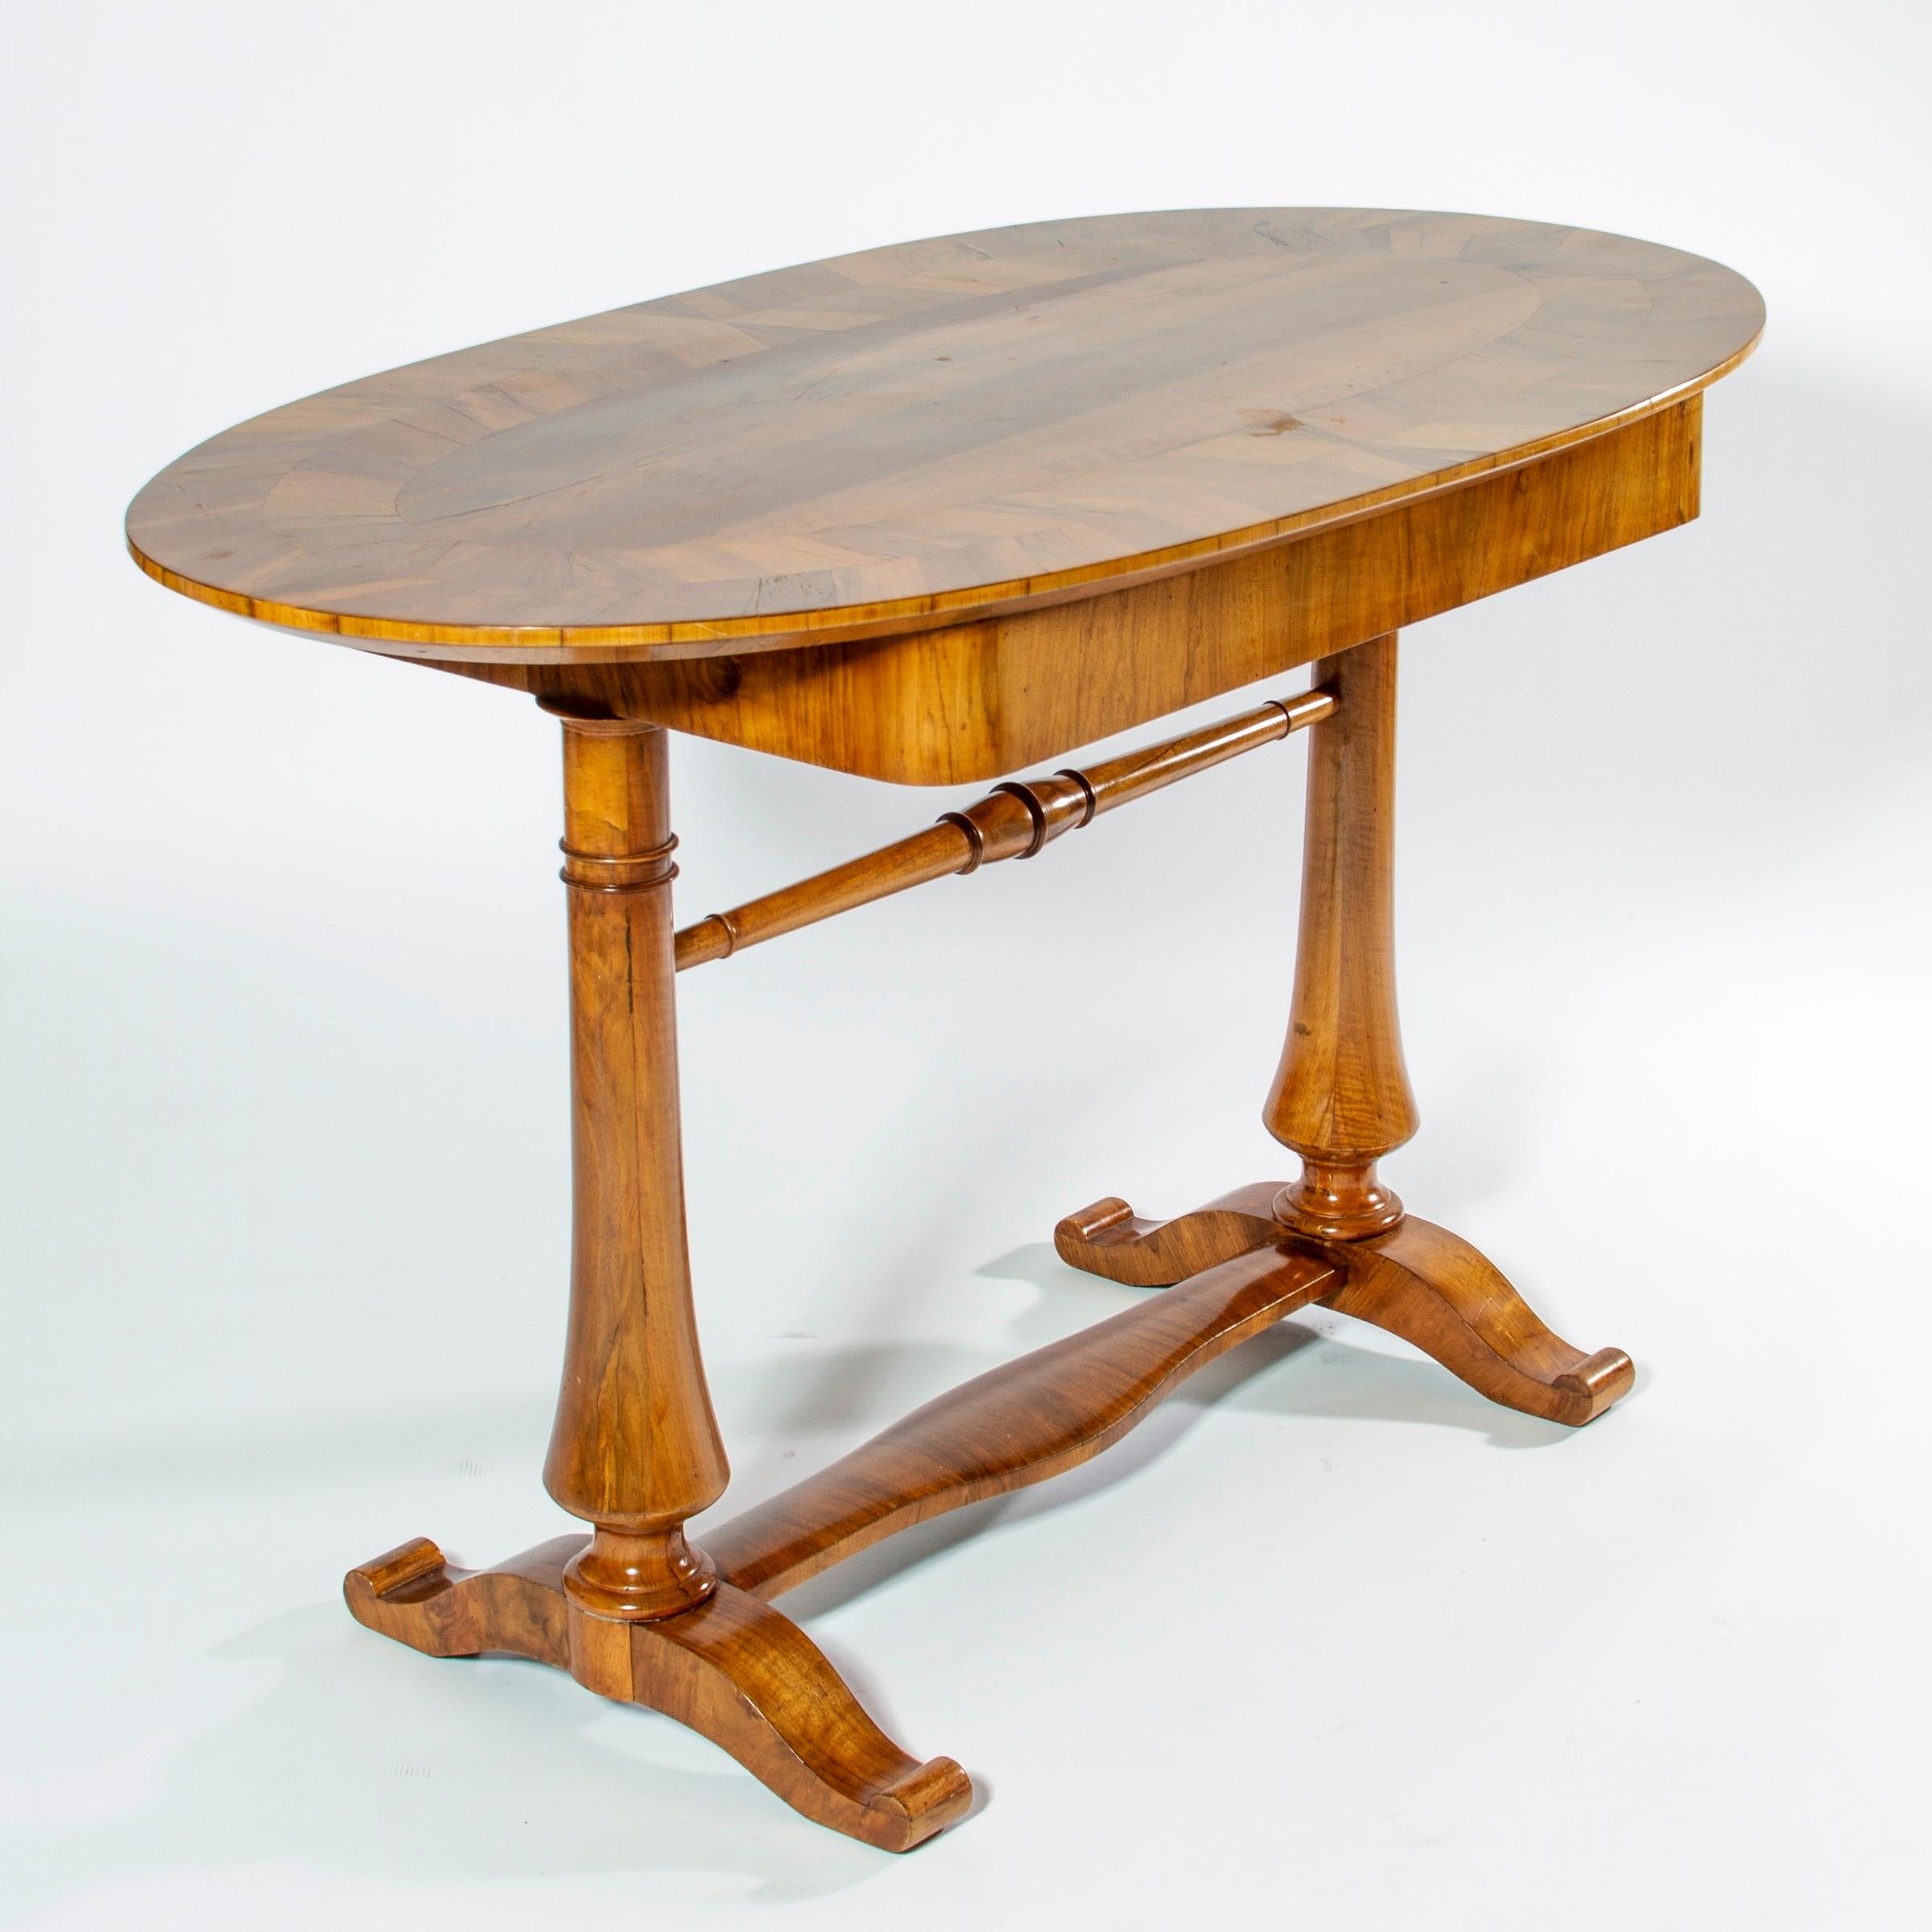 Swedish Biedermeier Oval Desk or Table with Drawer, 19th Century, Sweden  For Sale 1